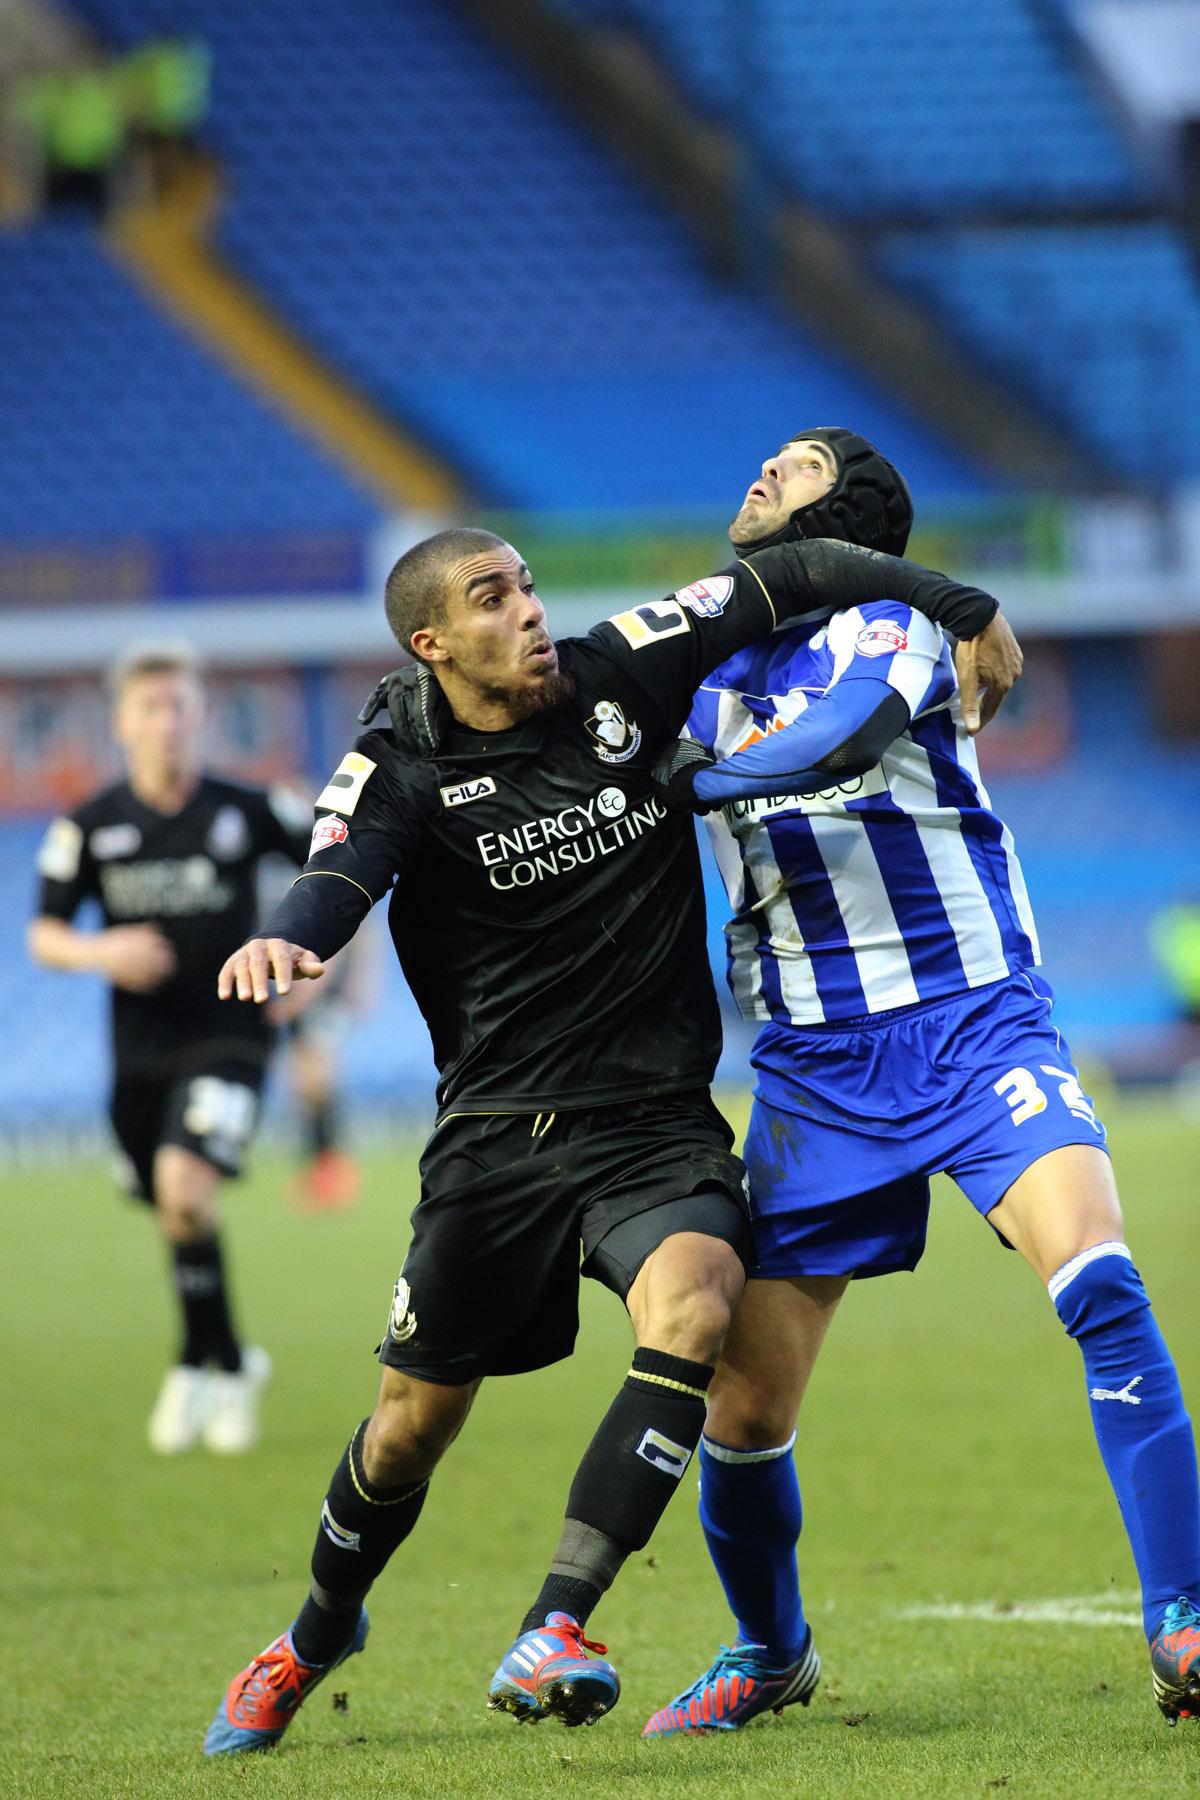 All the action from Sheffield Wednesday vs AFC Bournemouth at Hillsborough on Saturday December 21, 2013